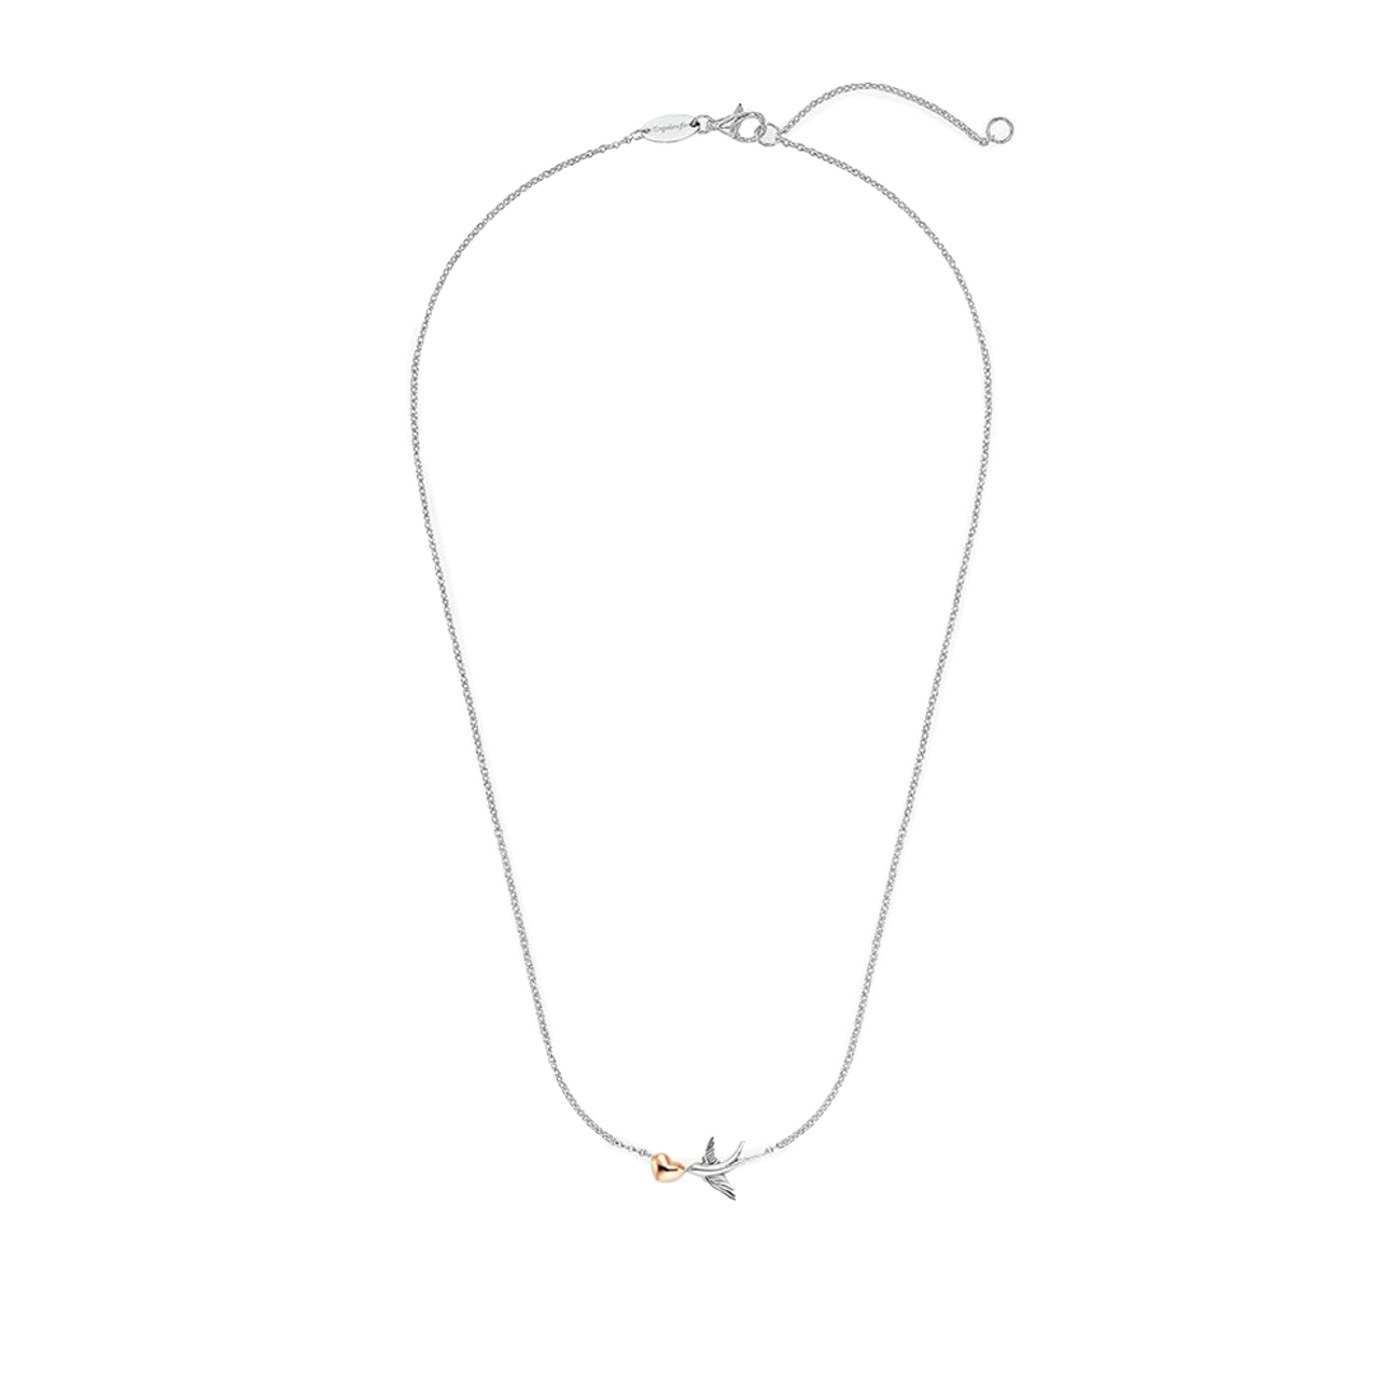 Engelsrufer Swallow Necklace in Sterling Silver 925